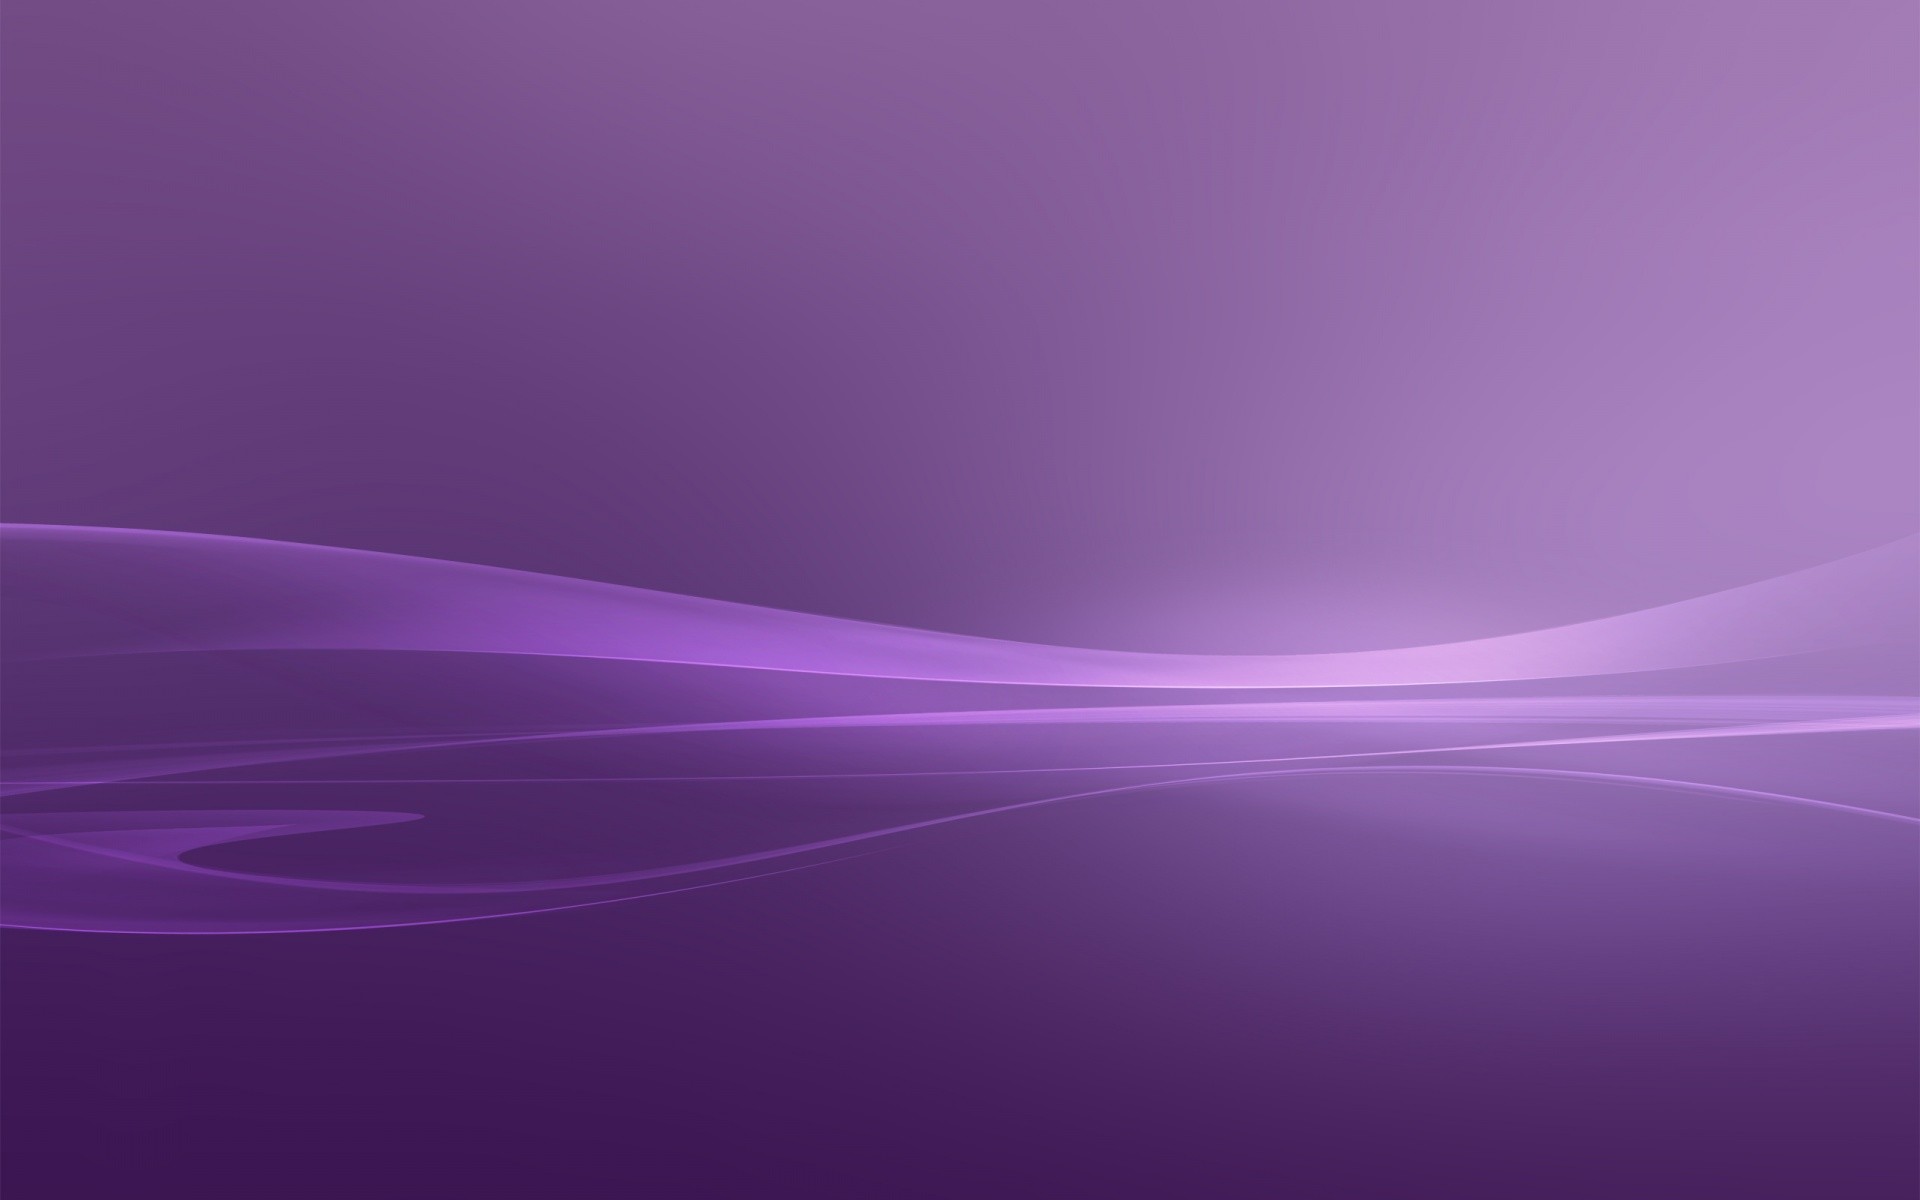 1920x1200 HD purple wallpaper image to use as background-13